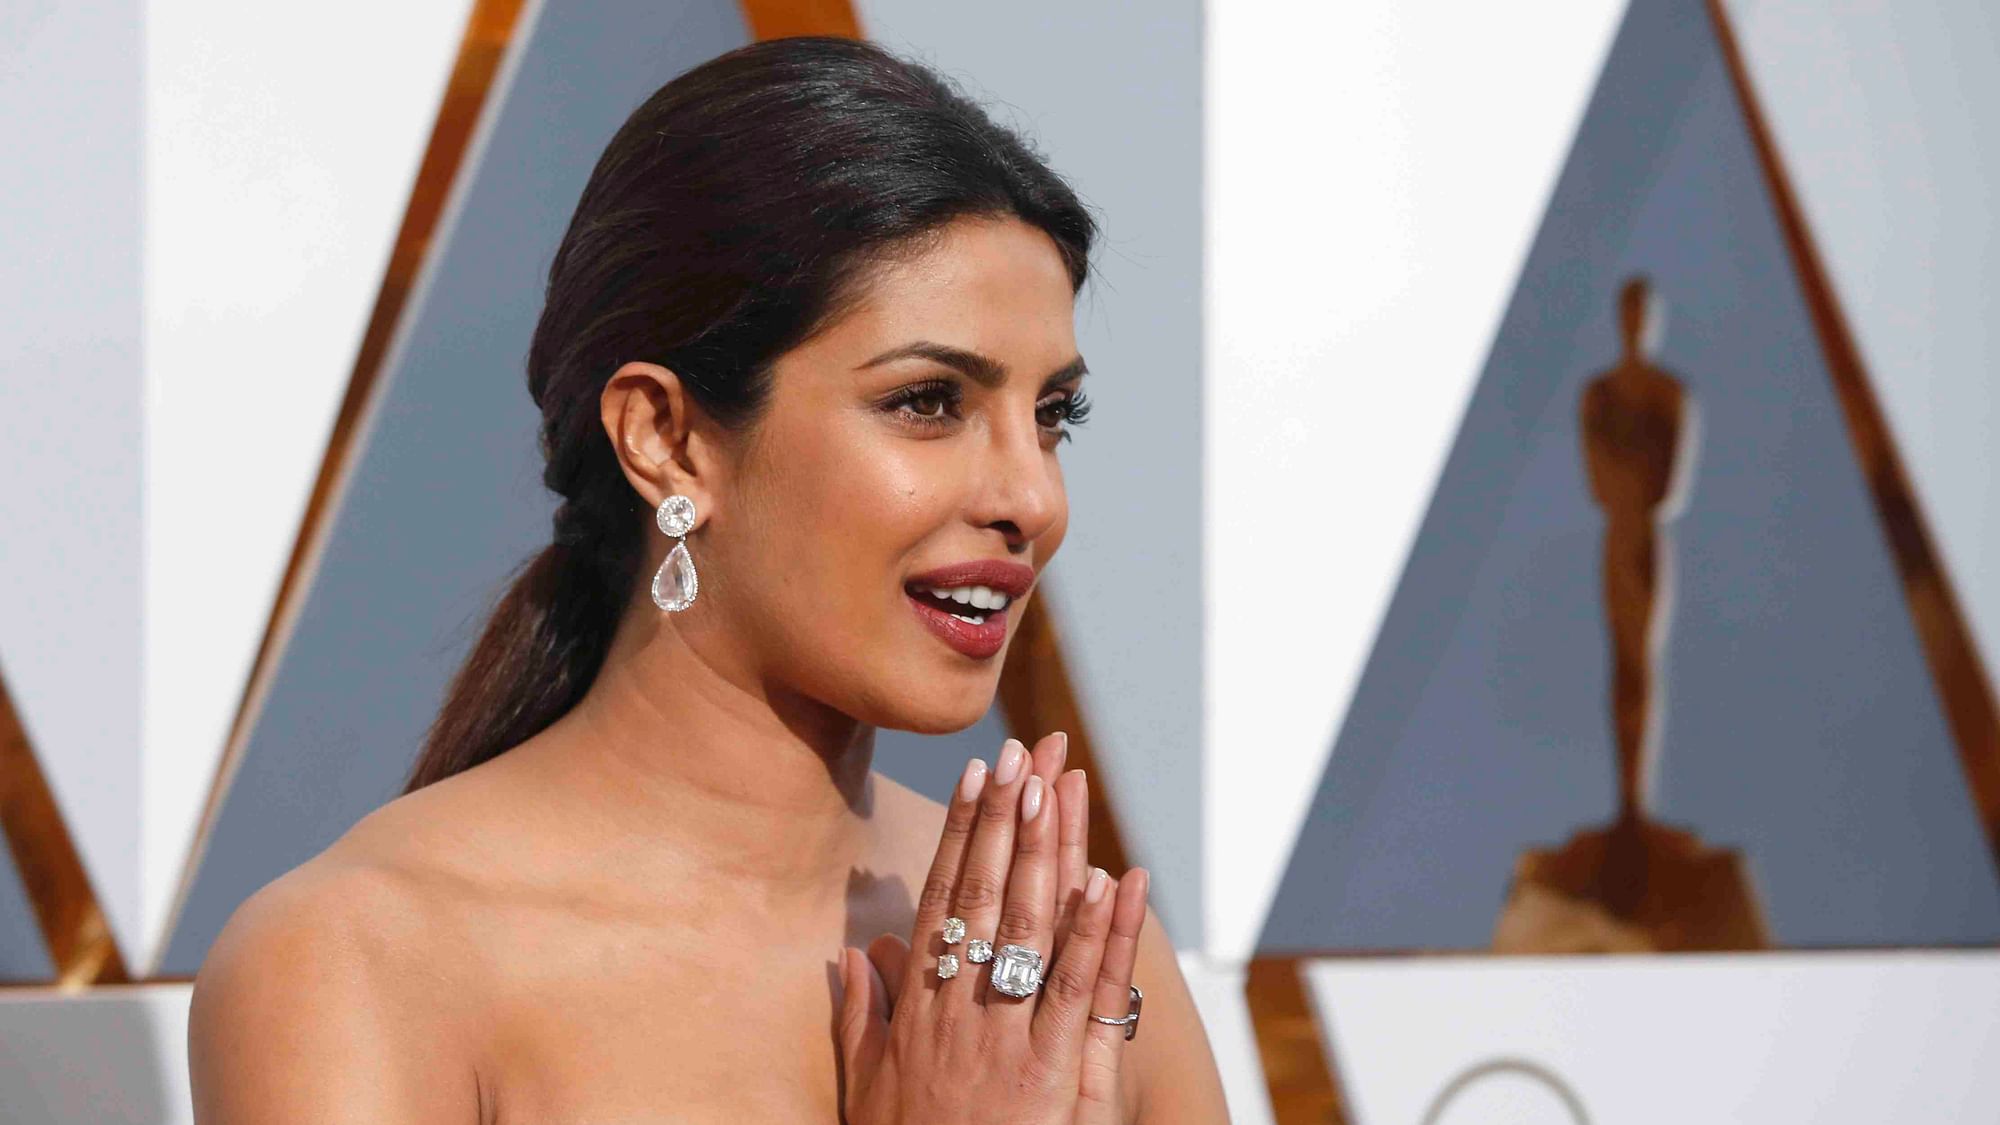 

Priyanka Chopra arrives at the Oscars on Sunday, 28 Feb. 2016, at the Dolby Theatre in Los Angeles. (Photo Courtesy: Richard Shotwell/Invision/AP)